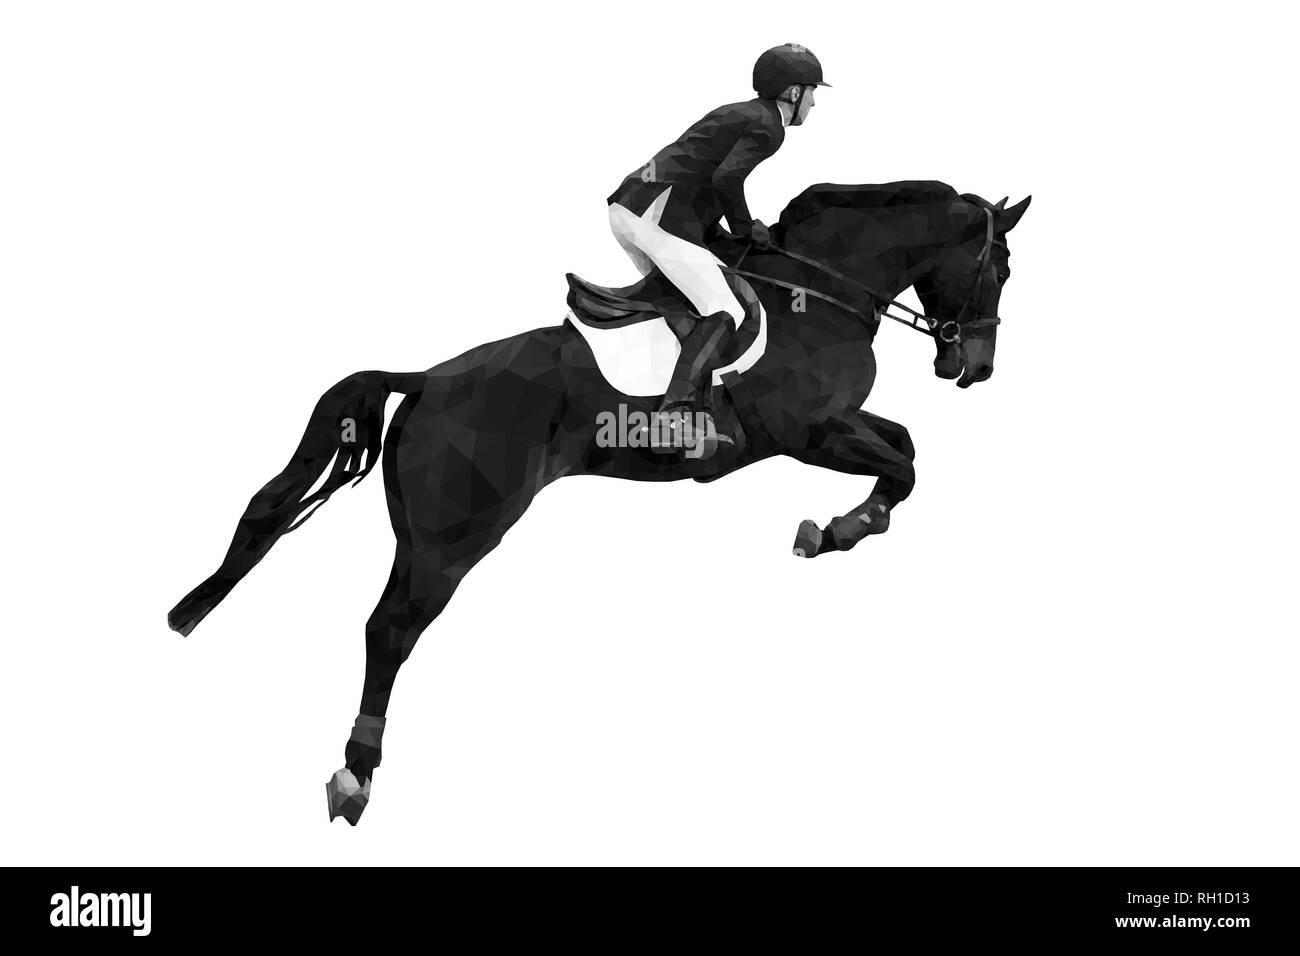 equestrian sport rider on horse jumping black-white image Stock Photo